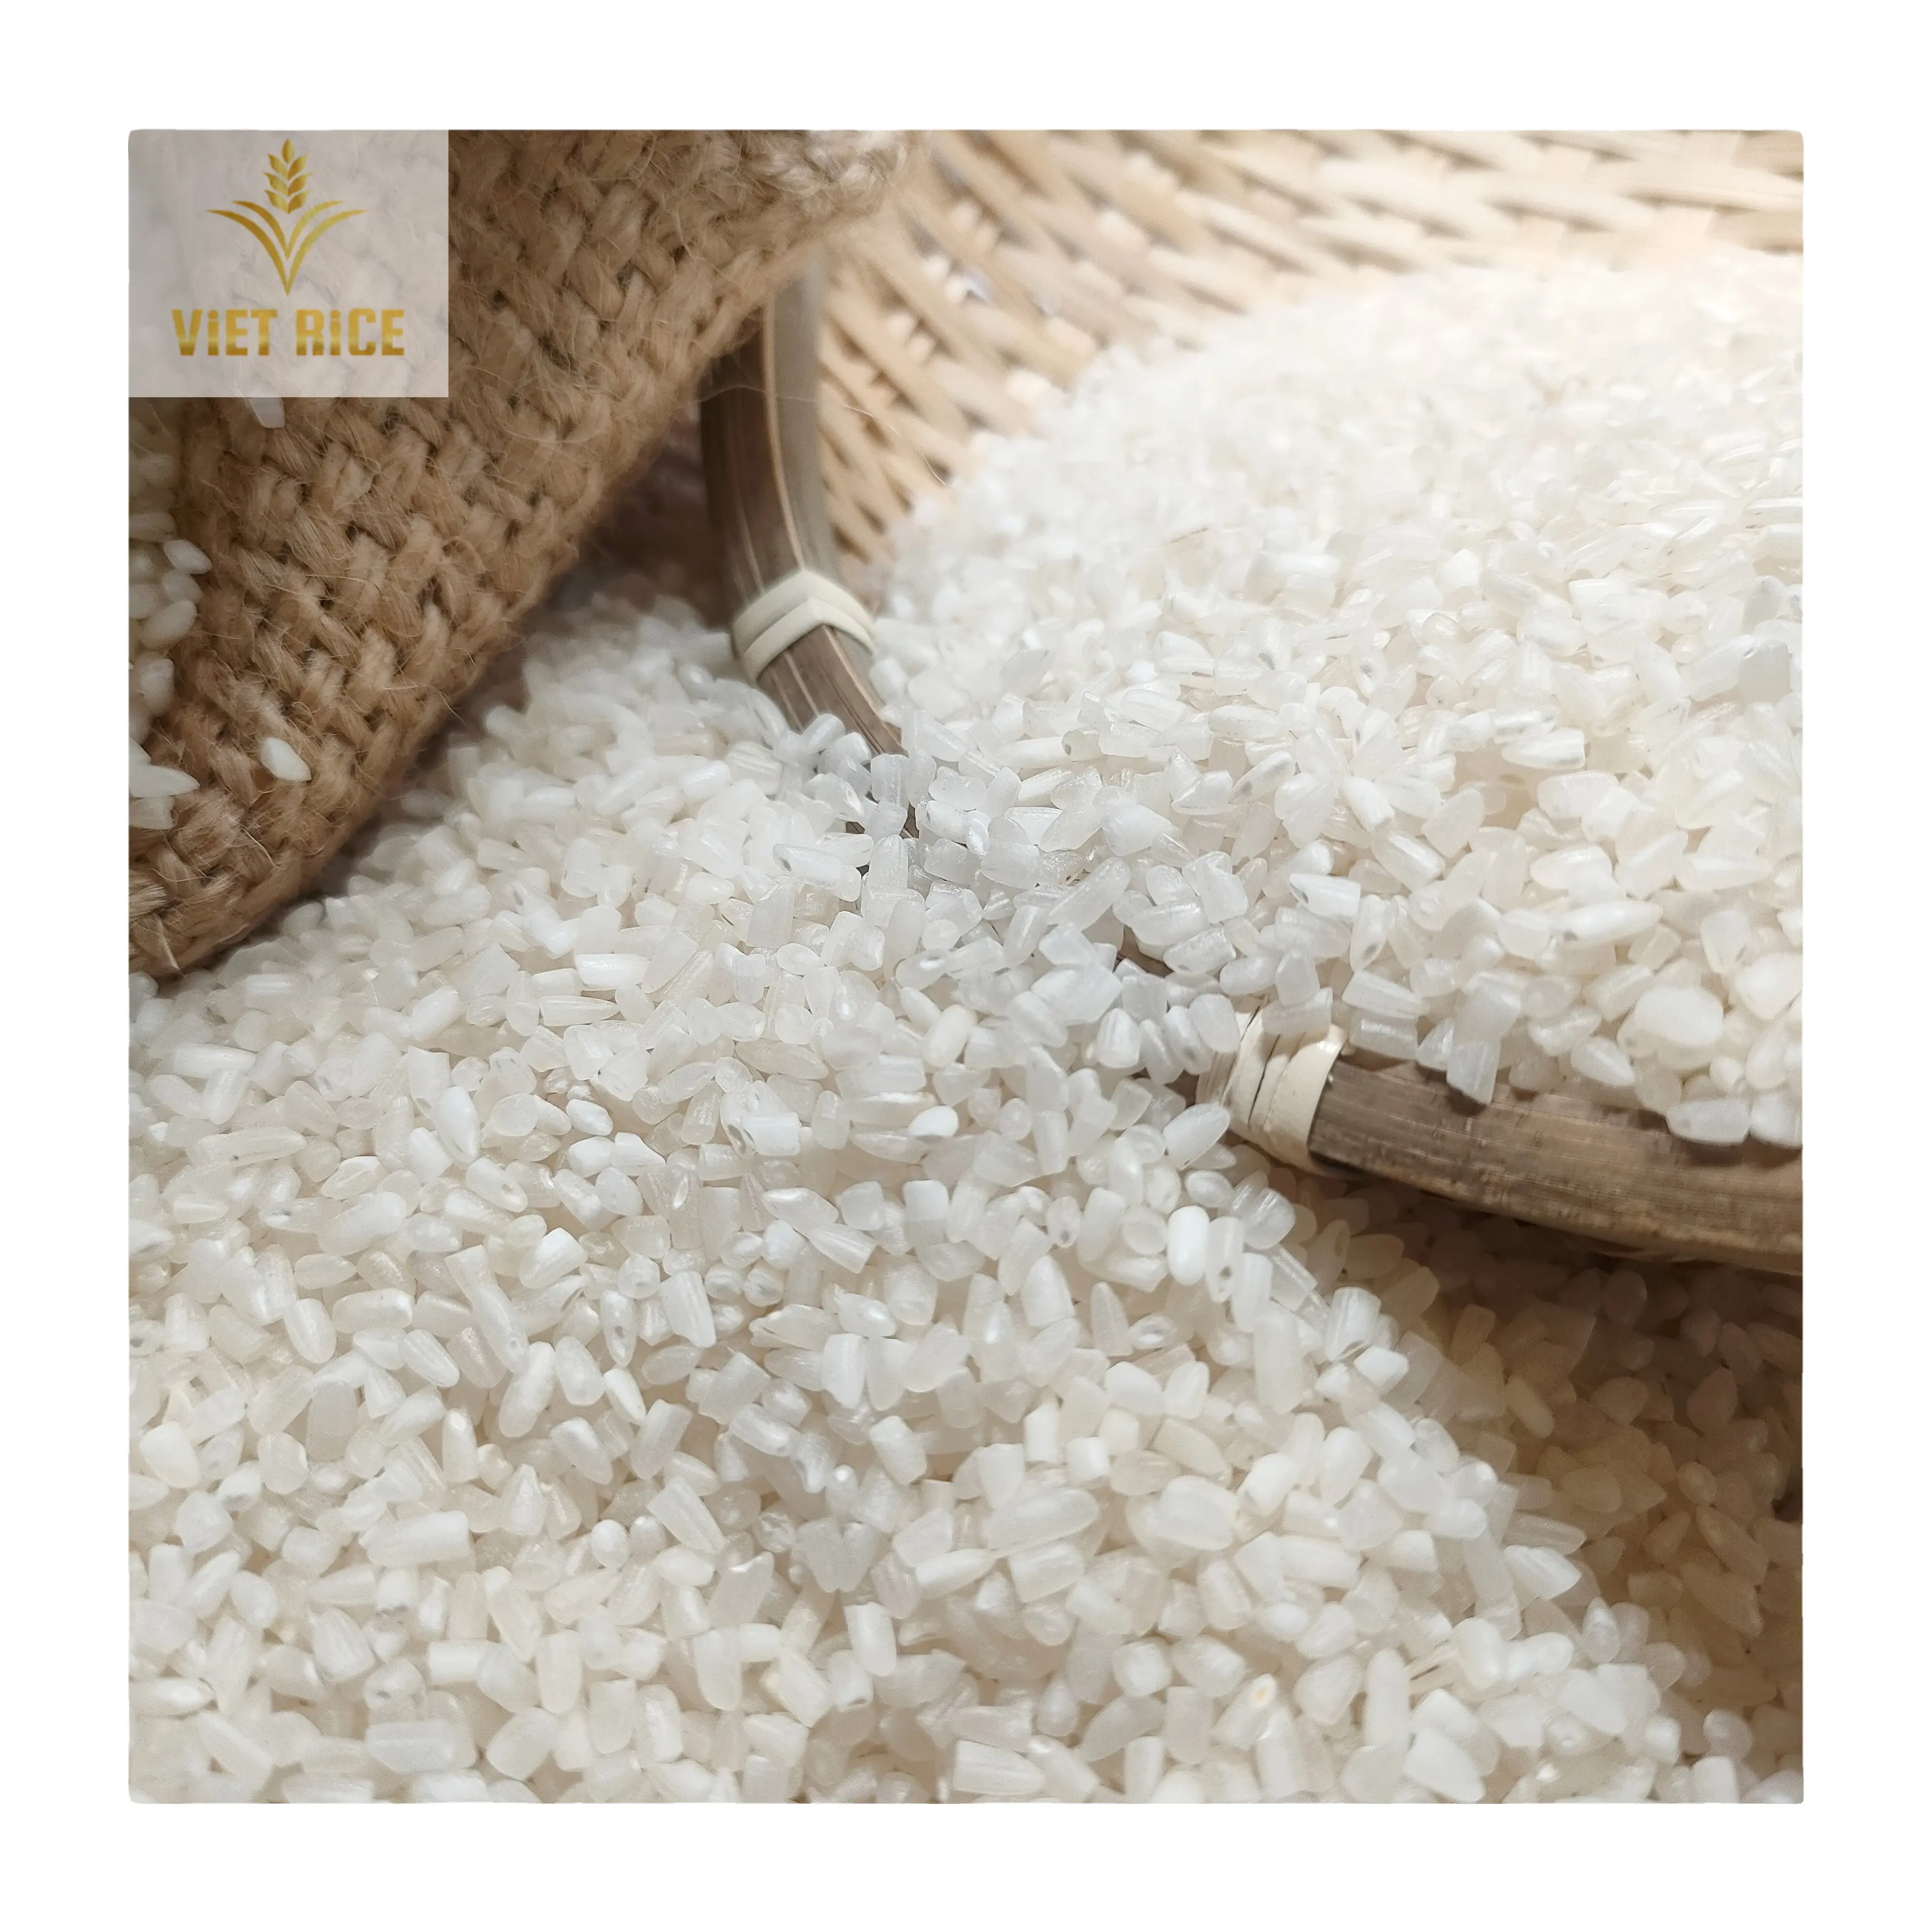 Top Products With High Quality Best Price White Rice 100% Broken from Famous Wholesale from Vietnam ( Whatsapp +84837944290 )